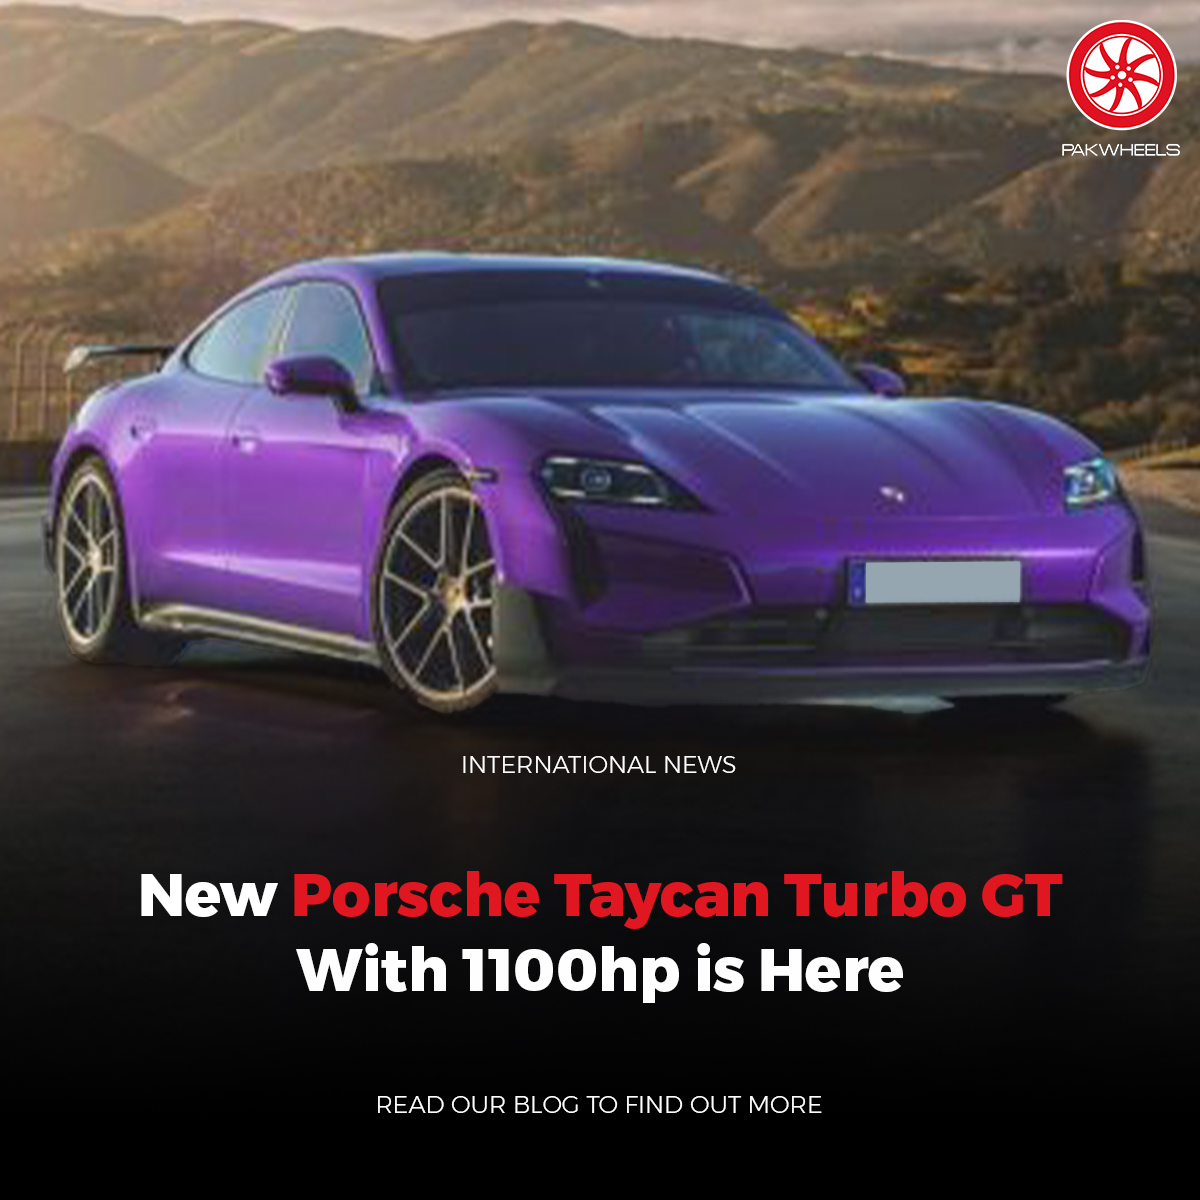 The all-new Porsche Taycan Turbo GT aims directly at the Tesla Model S Plaid, boasting a powerful engine, lighter weight, and speediest vibes.

See more at: ow.ly/Ef2Z50QT2Kv

#PakWheels #PWBlogs #Porsche #PorscheTaycan